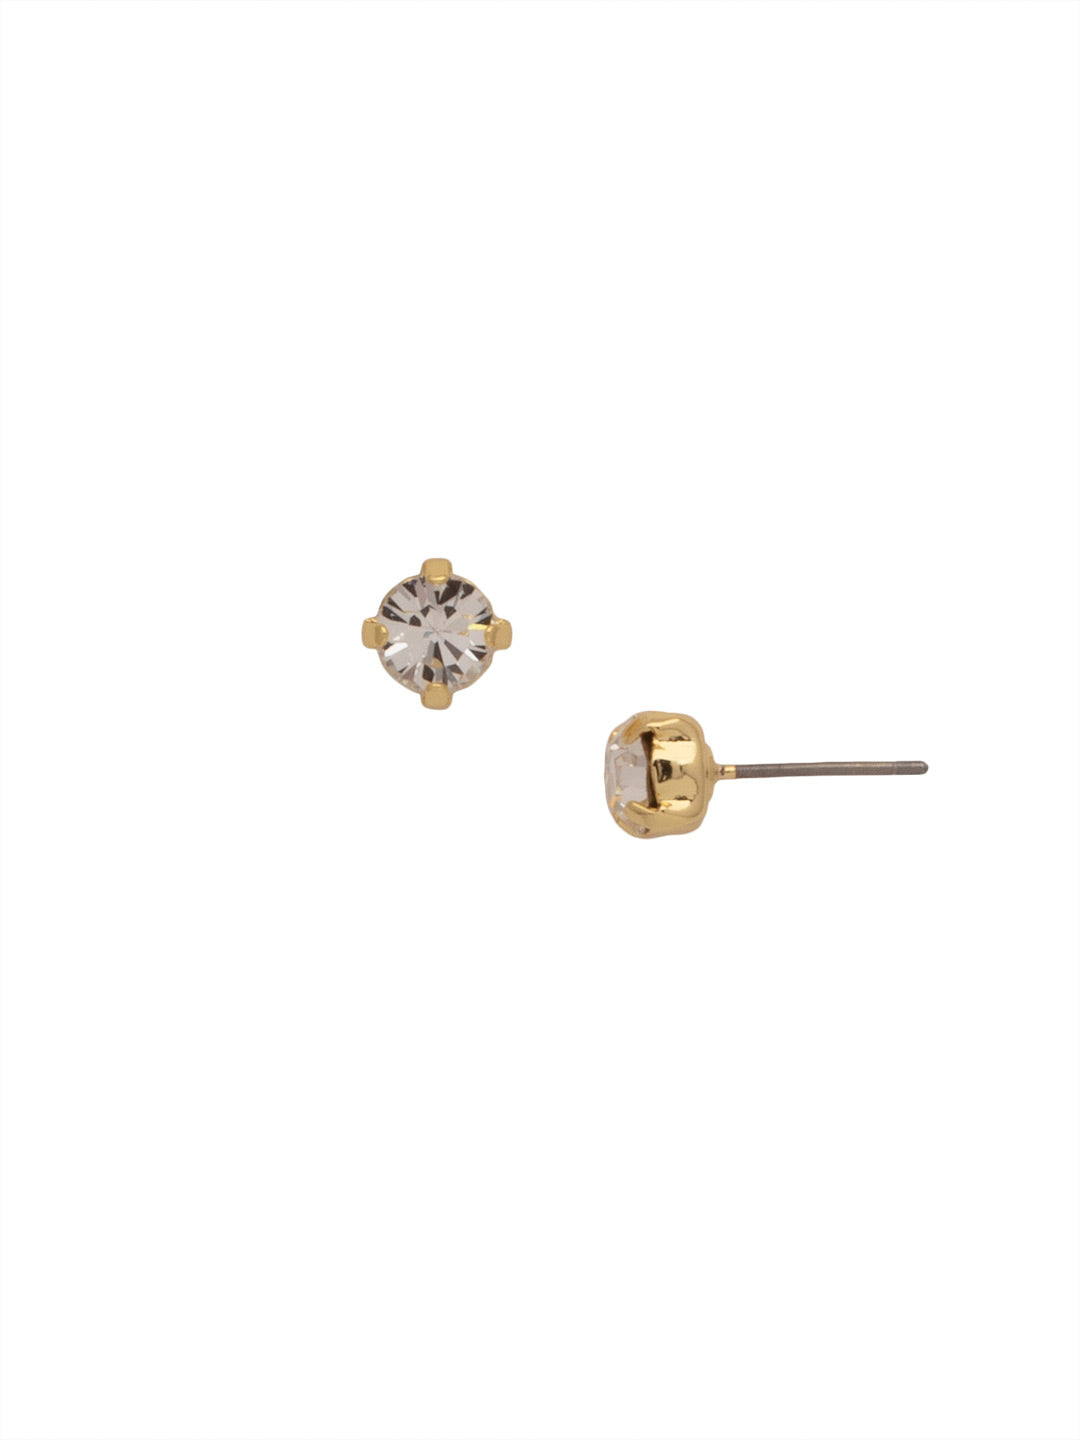 Jayda Stud Earrings - EDN32BGCRY - <p>The Jayda Stud Earrings are the perfect every day wardrobe staple. A round crystal nestles perfectly in a metal plated post with four prongs. From Sorrelli's Crystal collection in our Bright Gold-tone finish.</p>